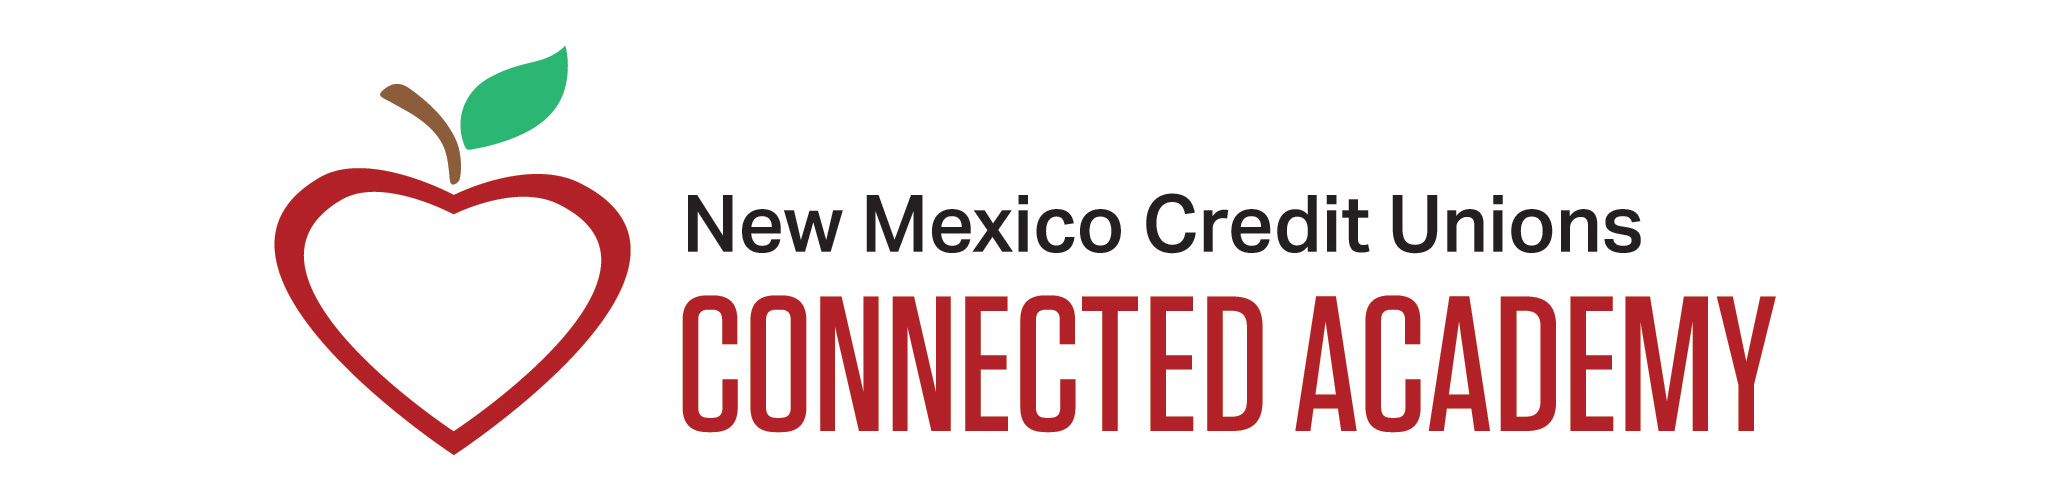 New Mexico Credit Unions Connected Academy Logo 